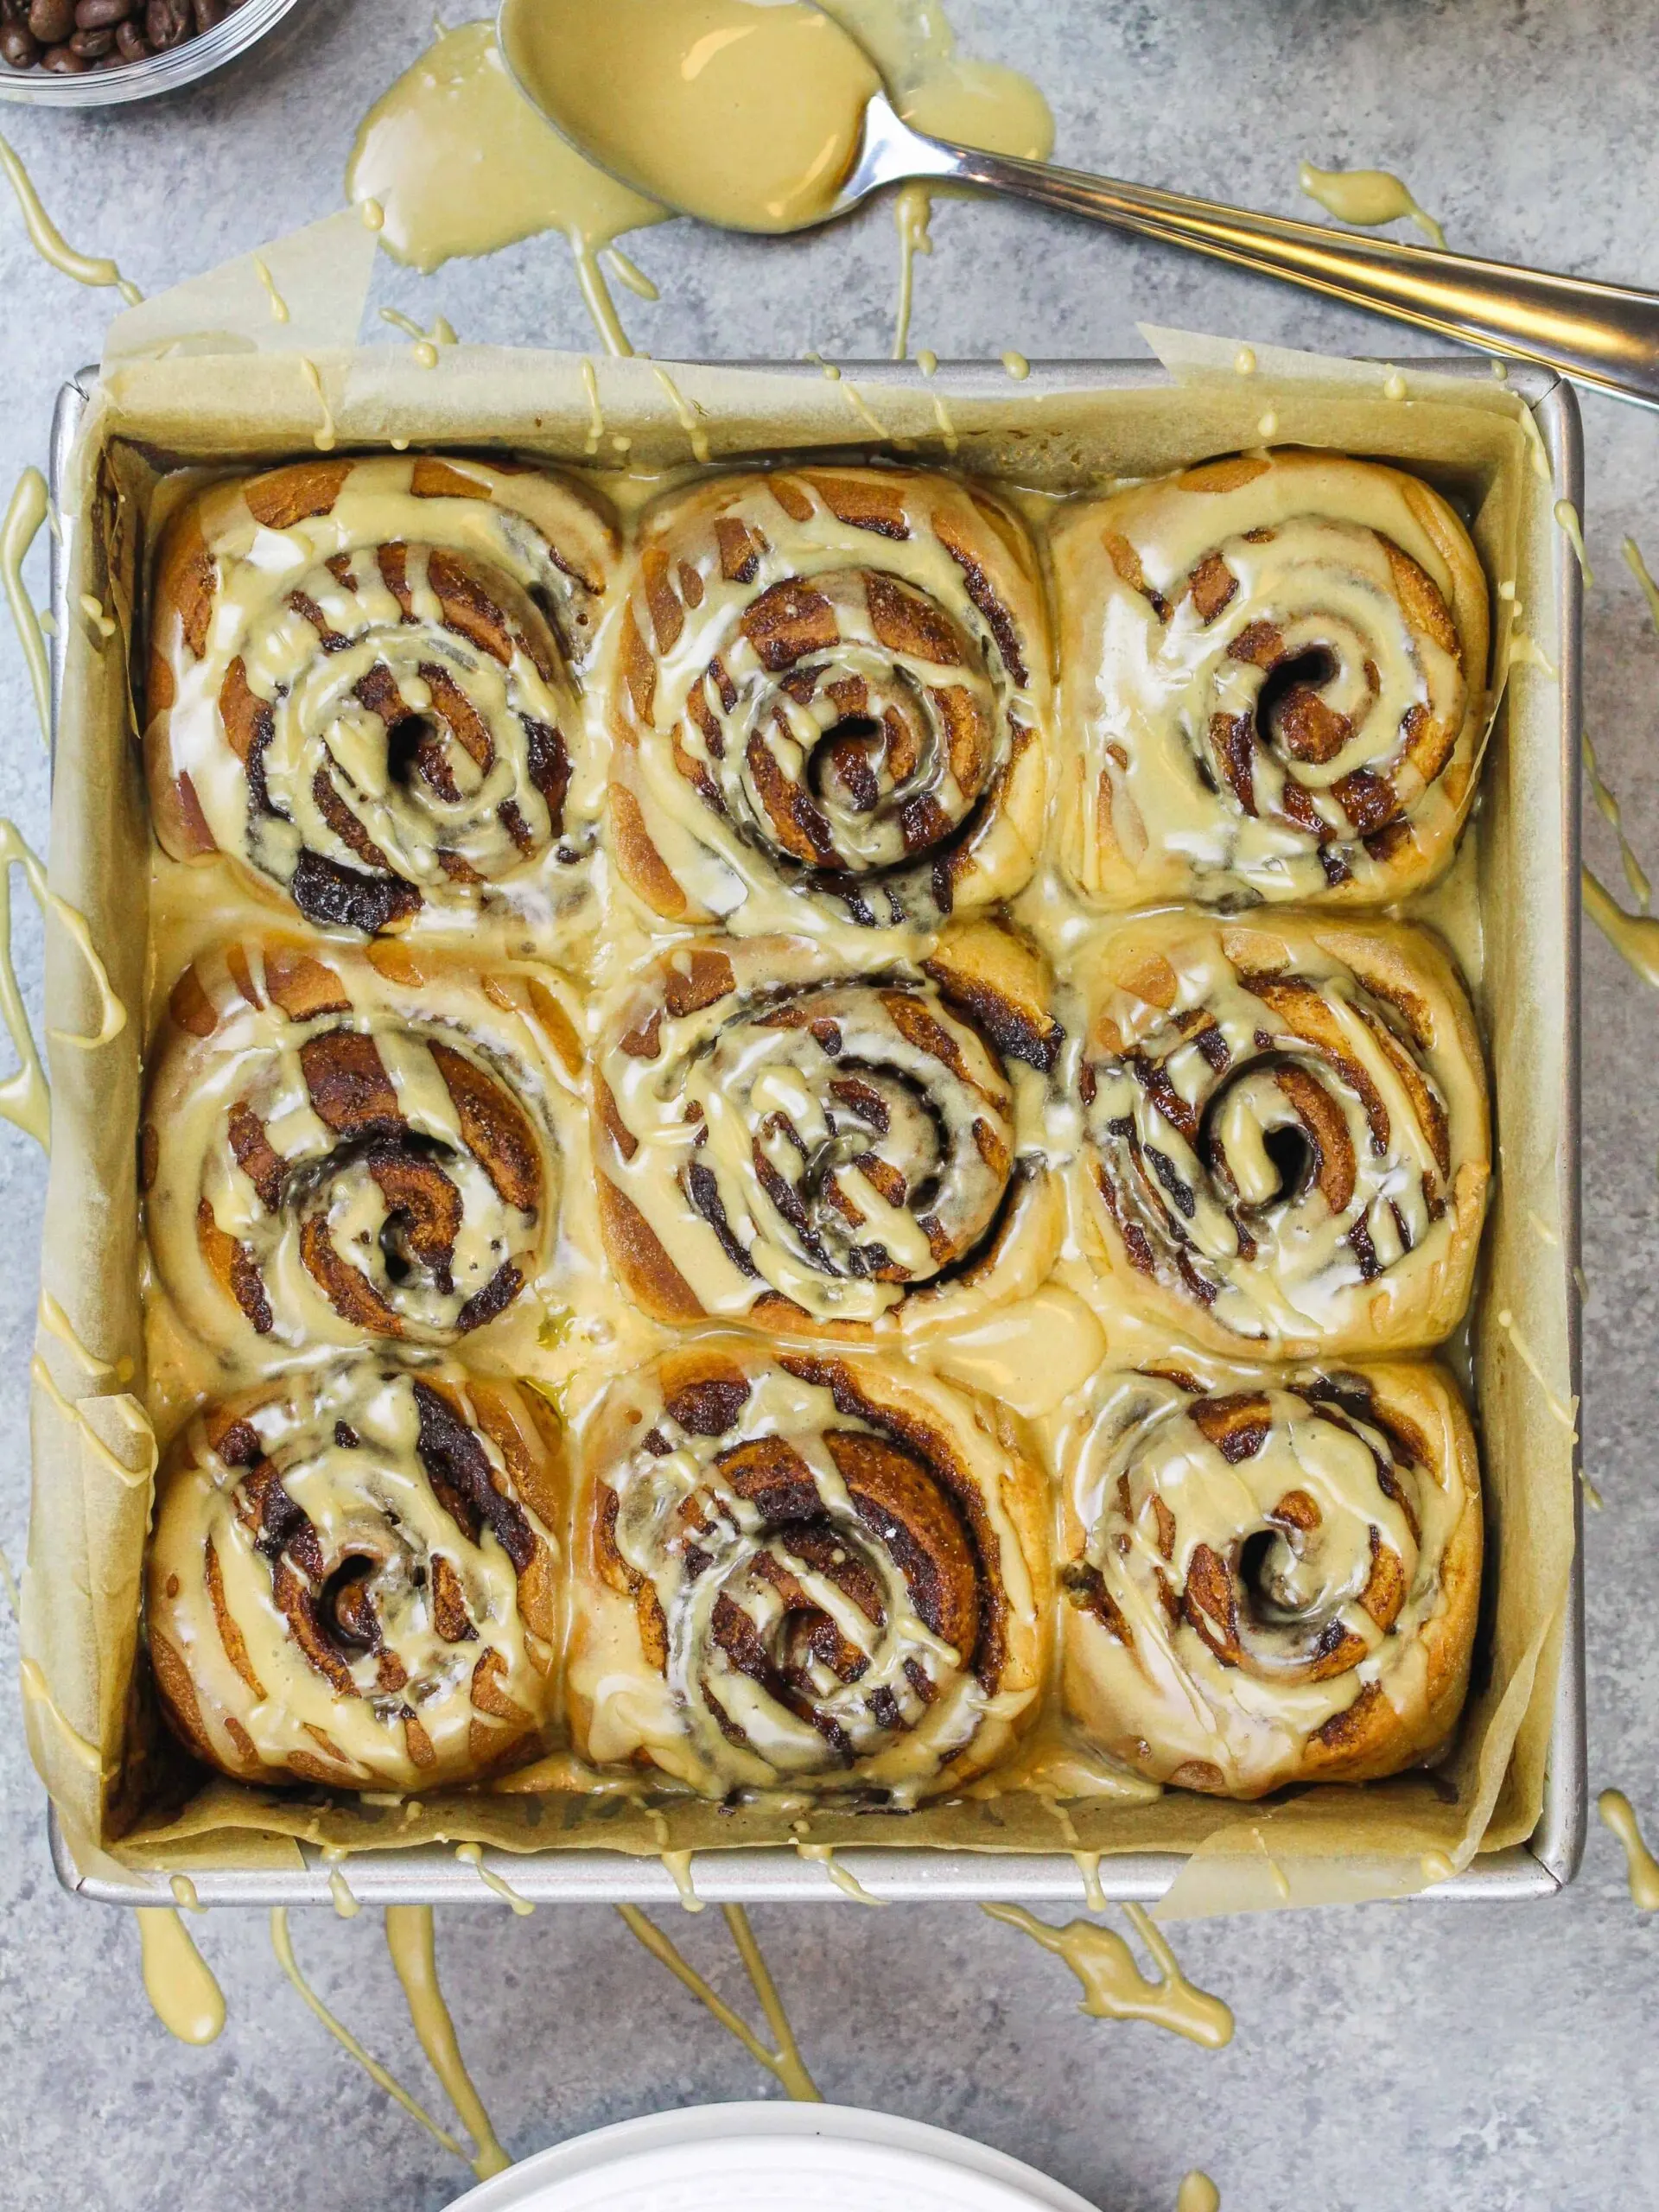 image of espresso cinnamon rolls glazed and ready to be served